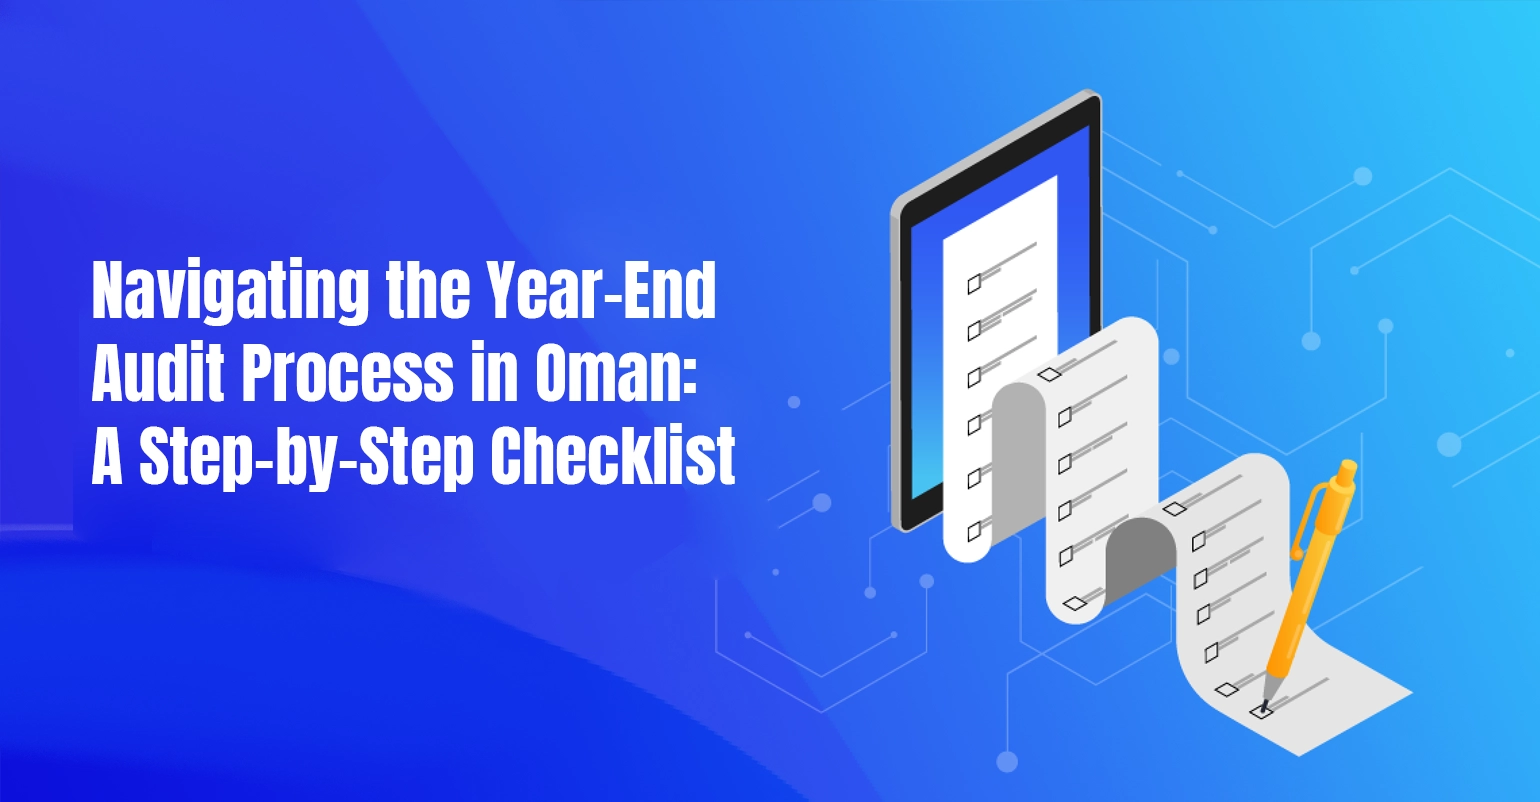 Navigating the Year-End Audit Process in Oman: A Step-by-Step Checklist 